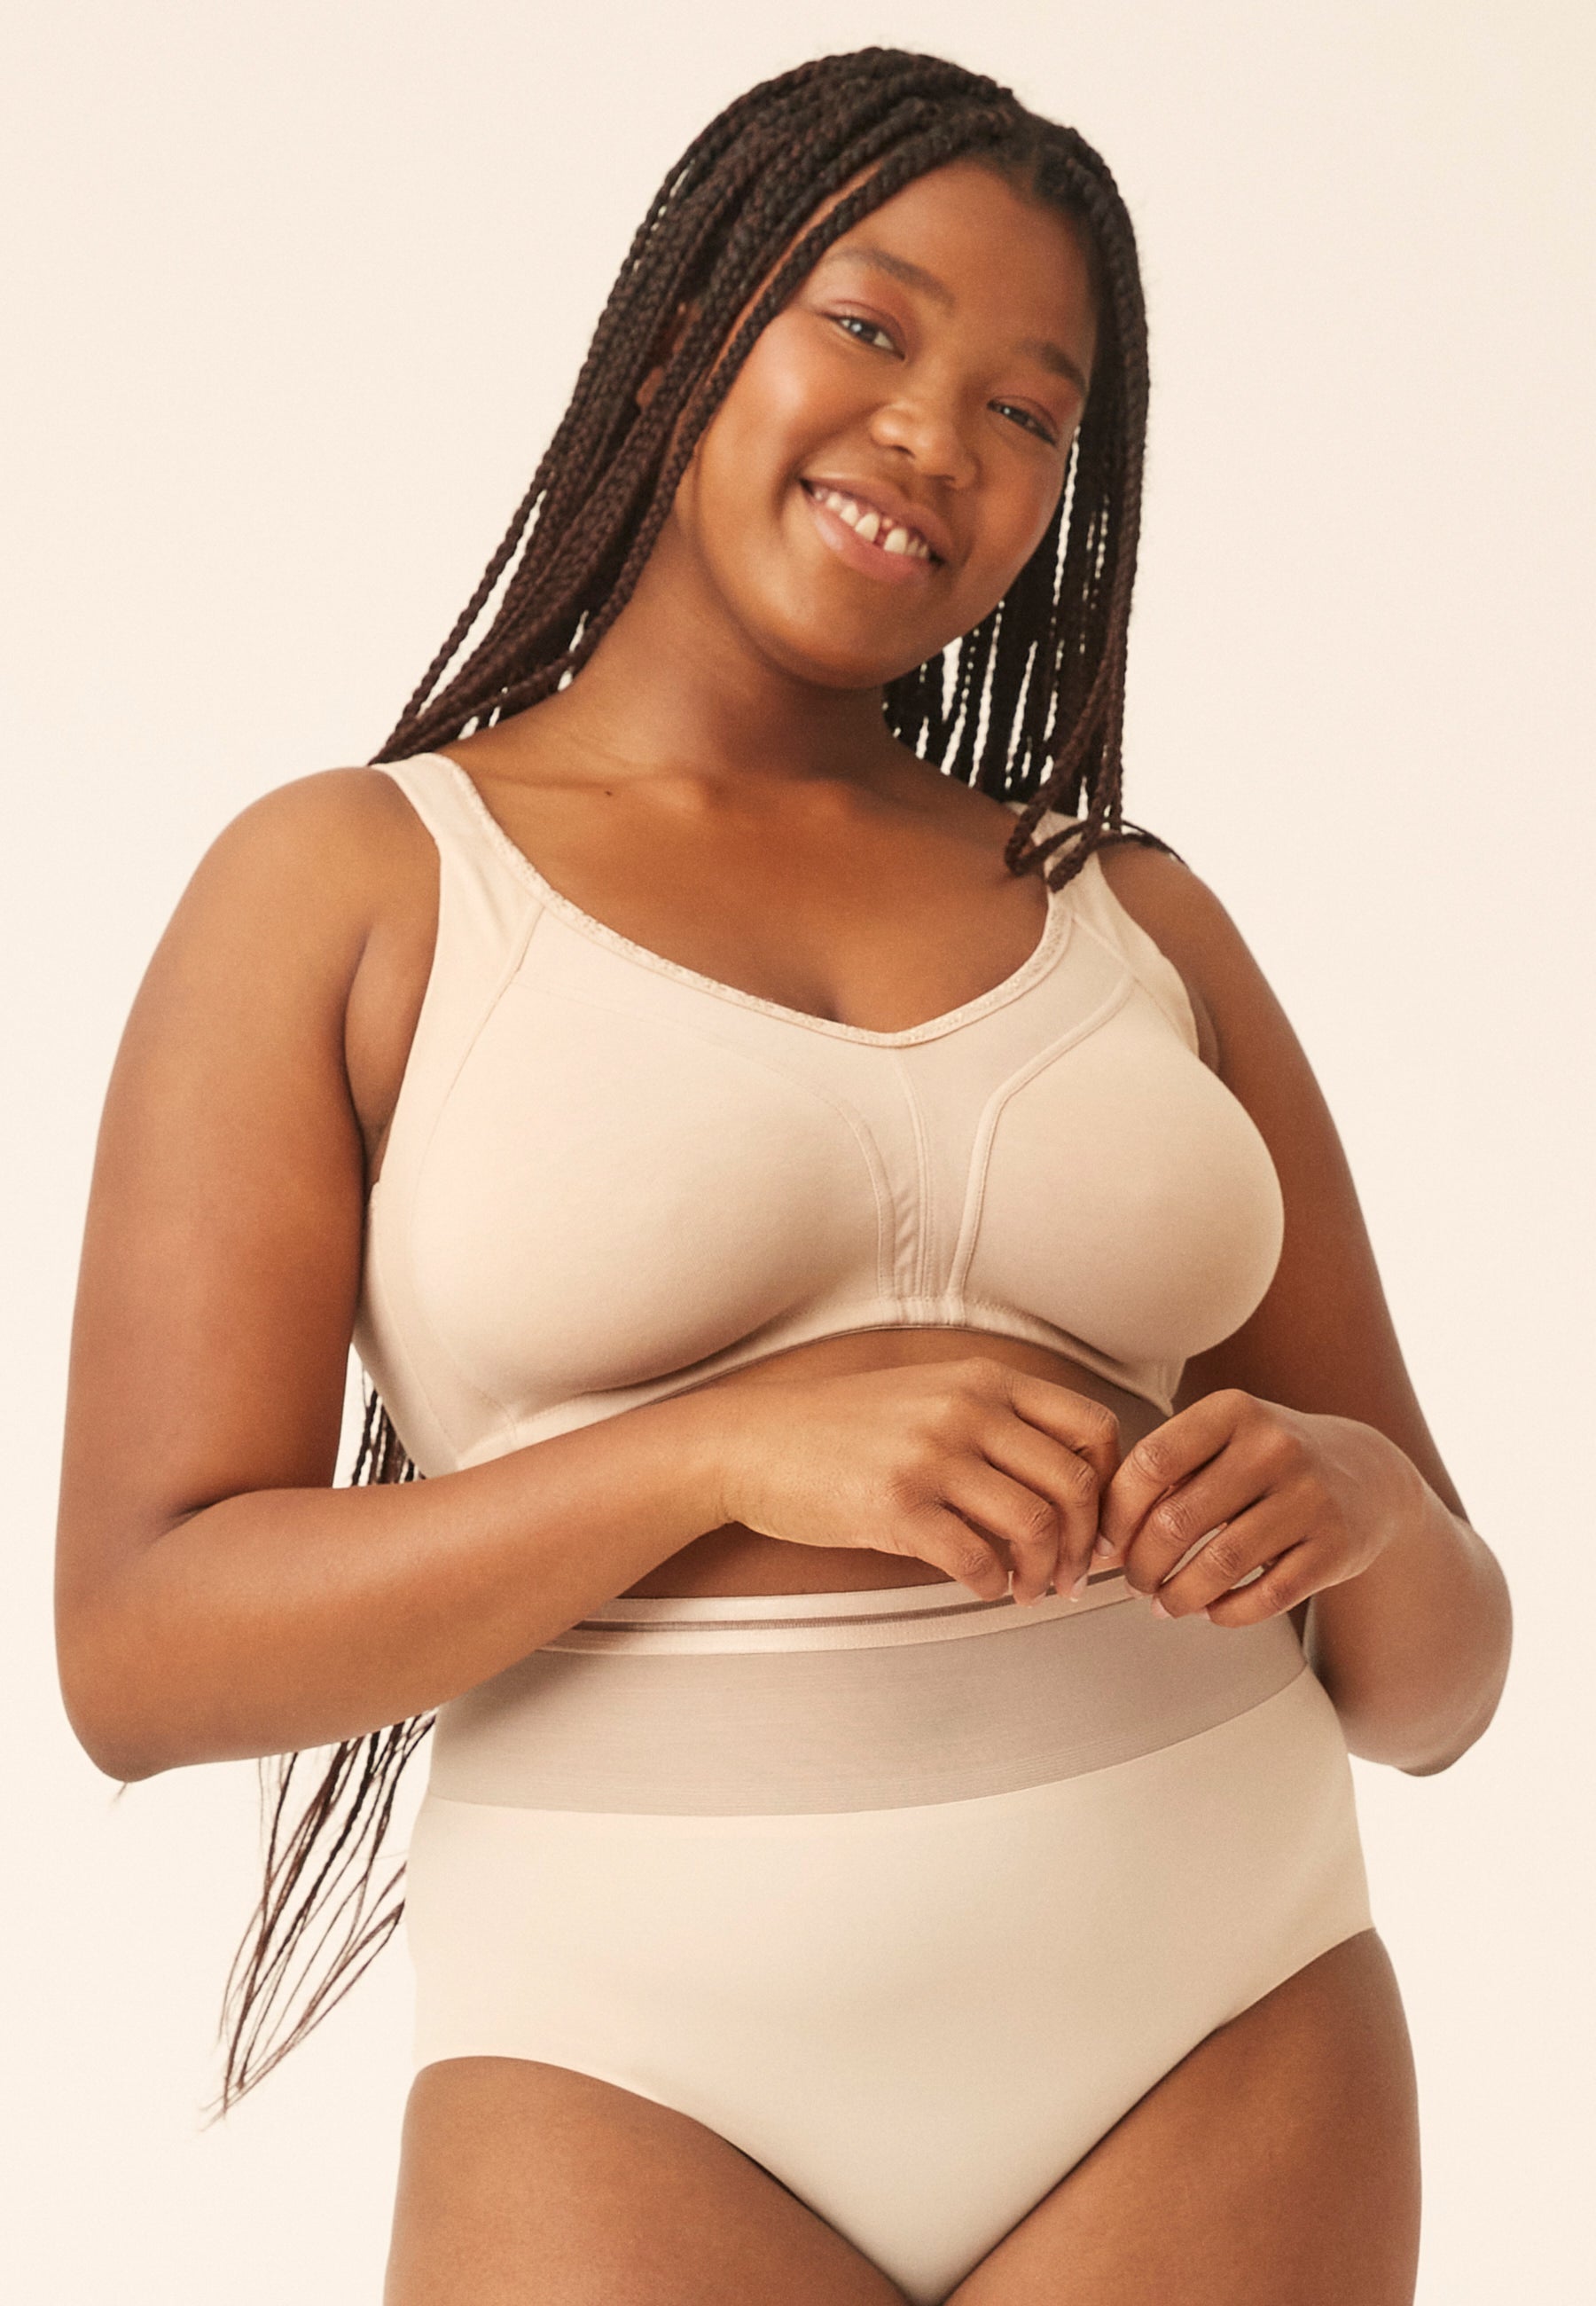 Bestselling bras for every type of woman - NATURANA – Page 2